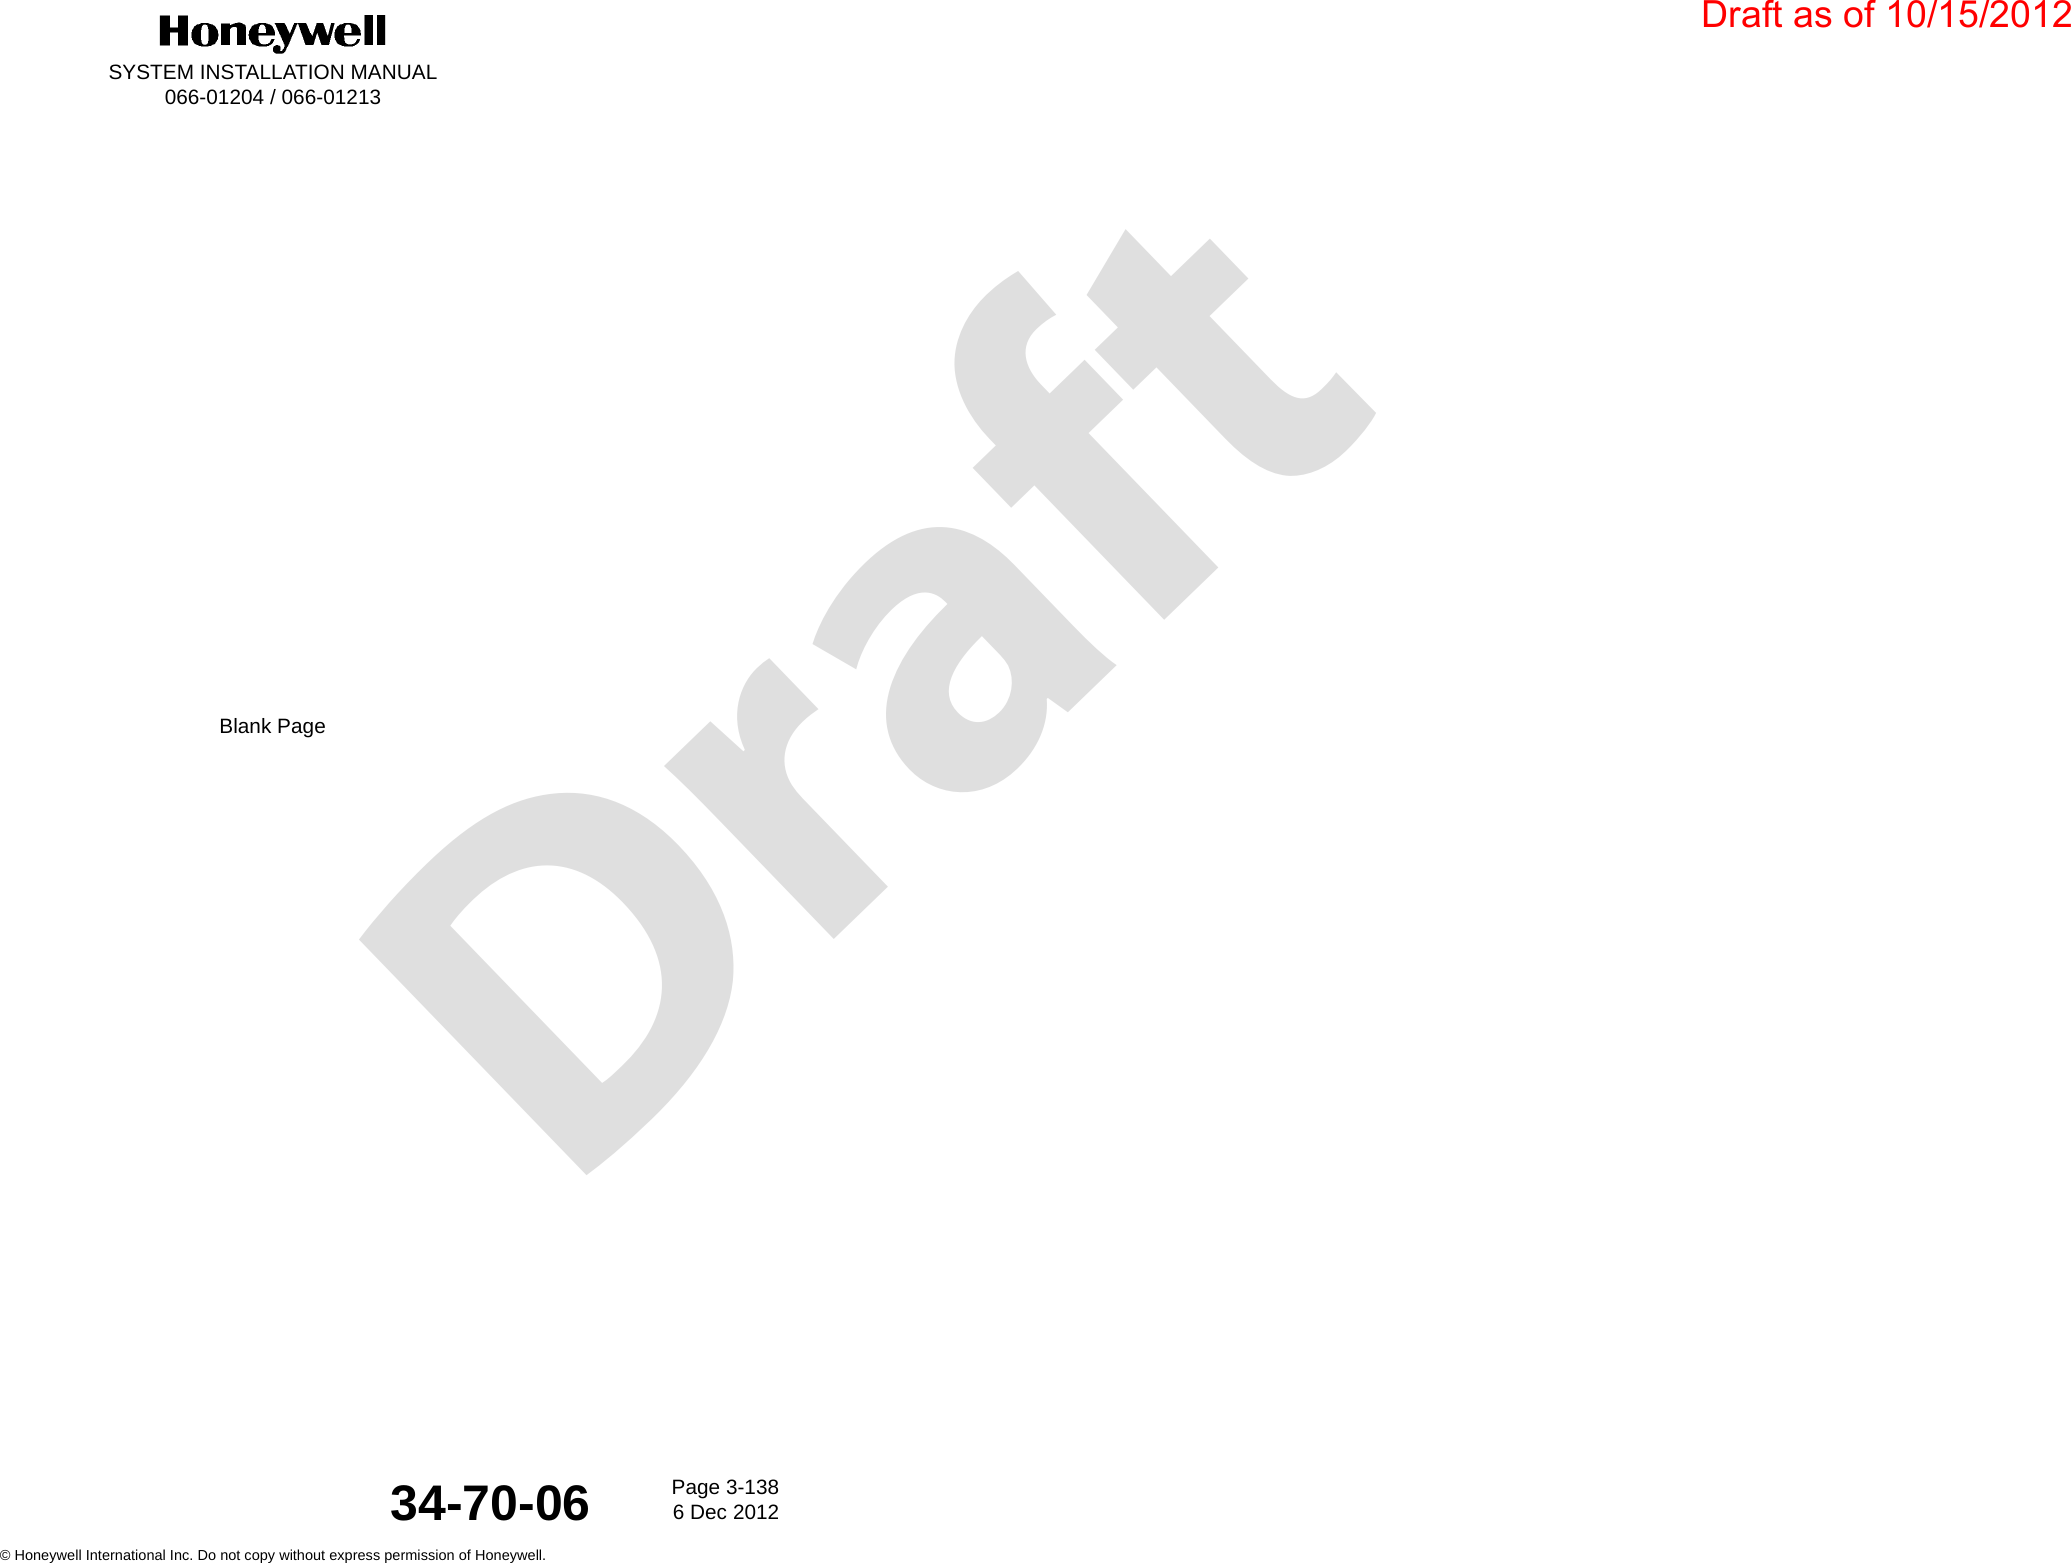 DraftSYSTEM INSTALLATION MANUAL066-01204 / 066-01213Page 3-1386 Dec 2012© Honeywell International Inc. Do not copy without express permission of Honeywell.34-70-06Blank PageDraft as of 10/15/2012